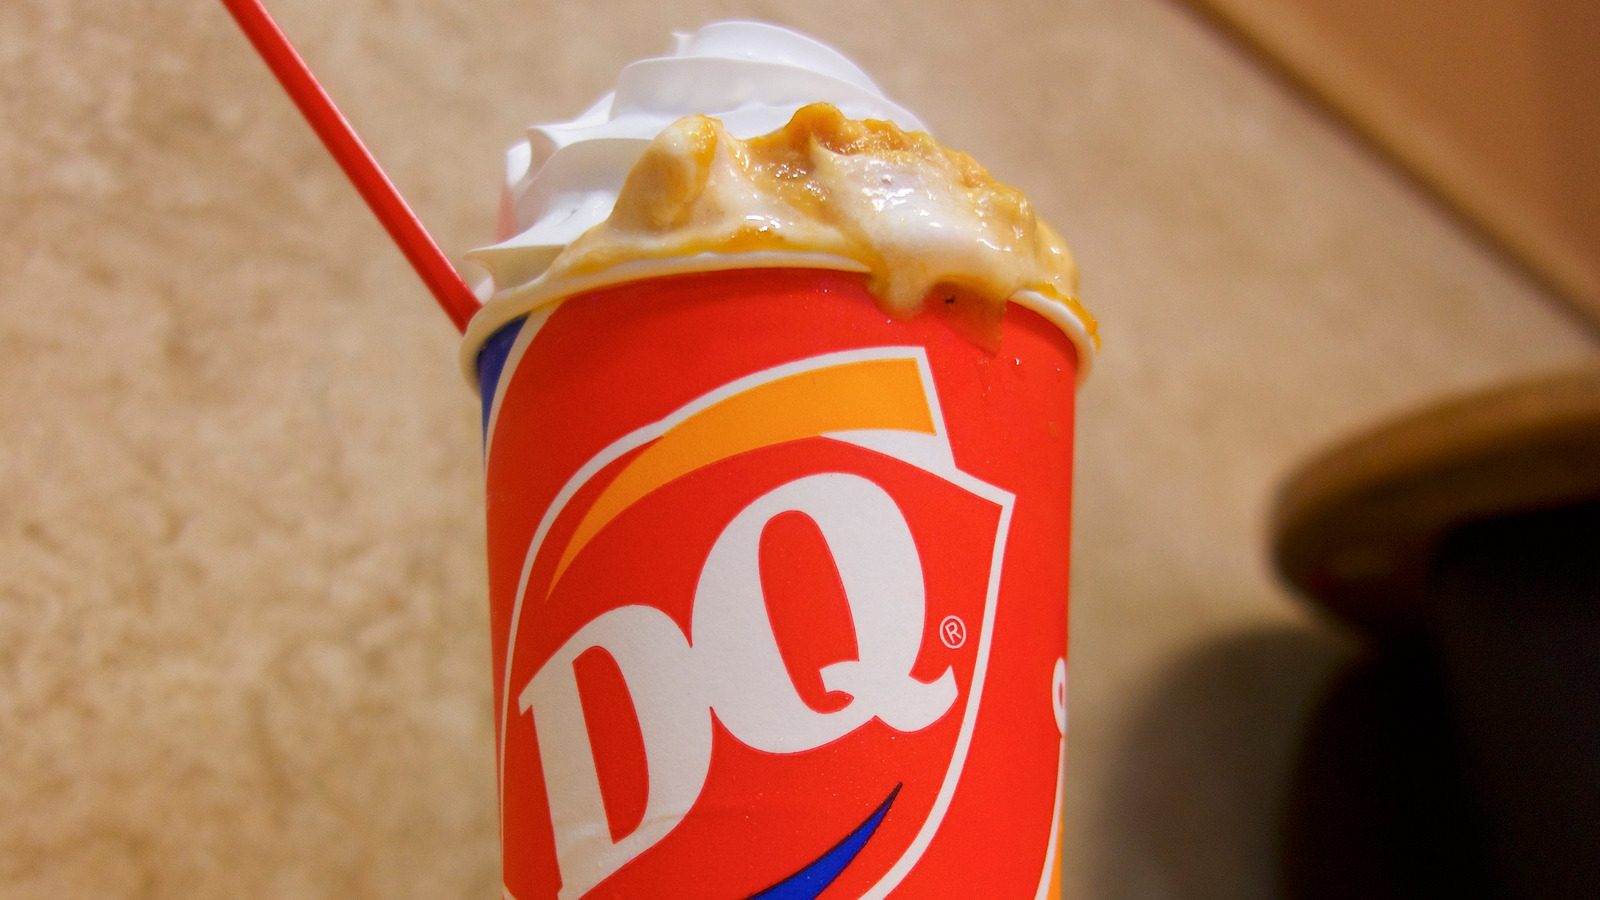 13 Discontinued Dairy Queen Menu Items We Desperately Miss